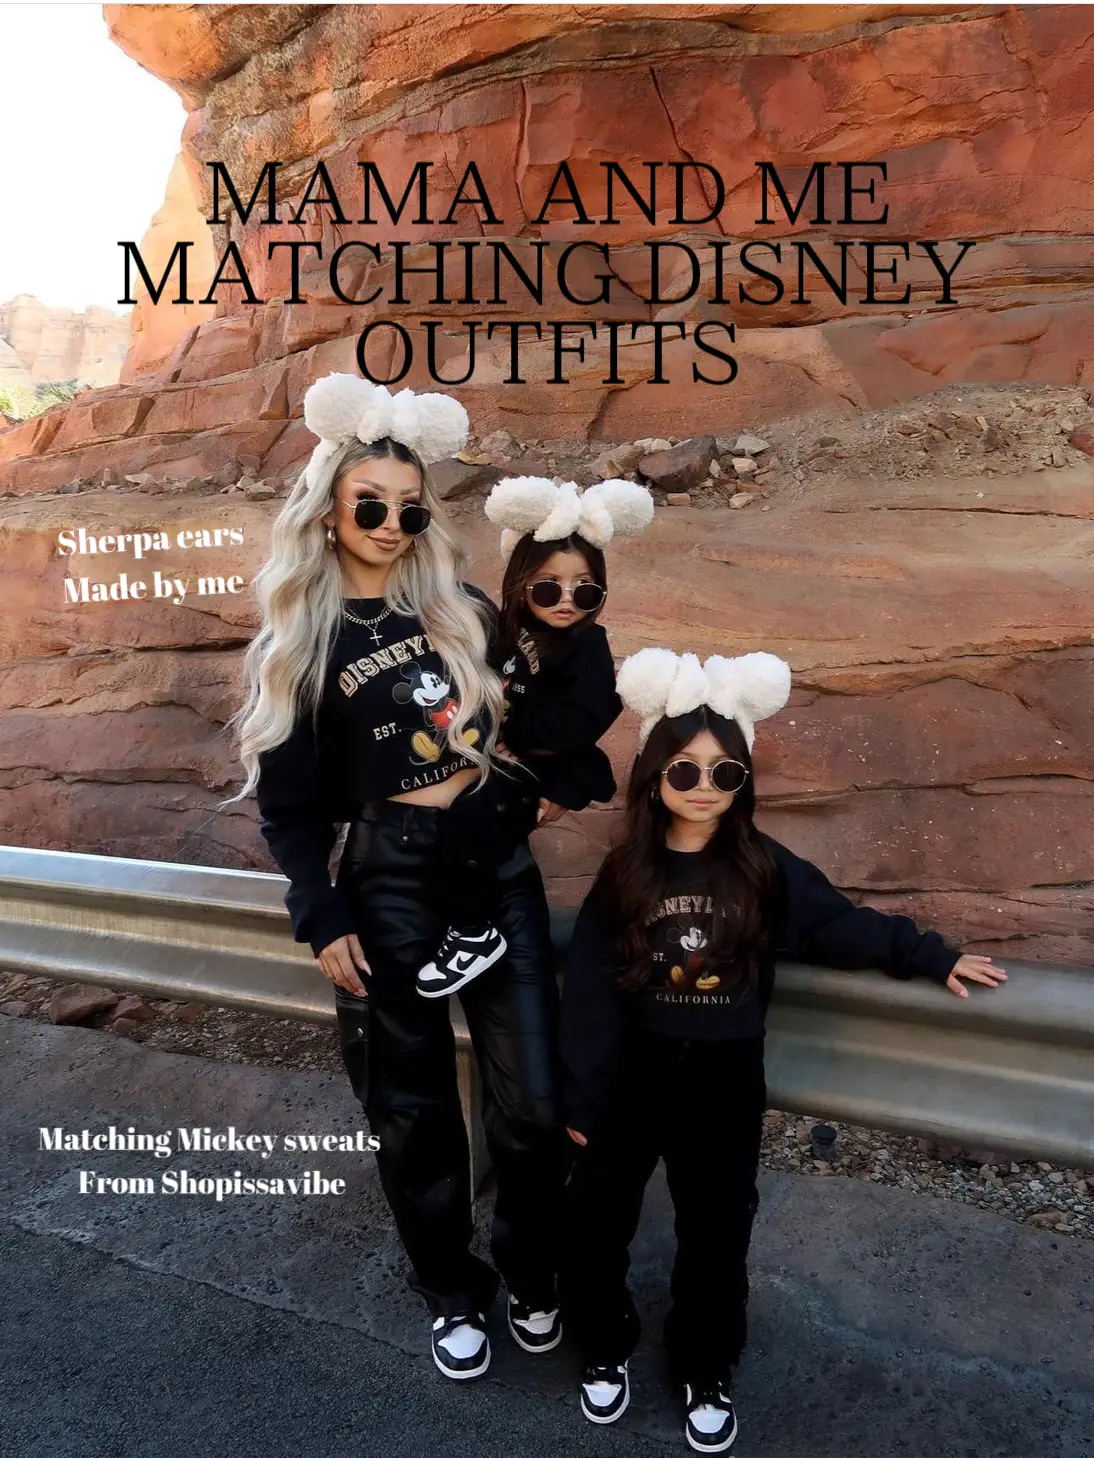 Mama and me matching Disney outfits, Gallery posted by Dayanaira